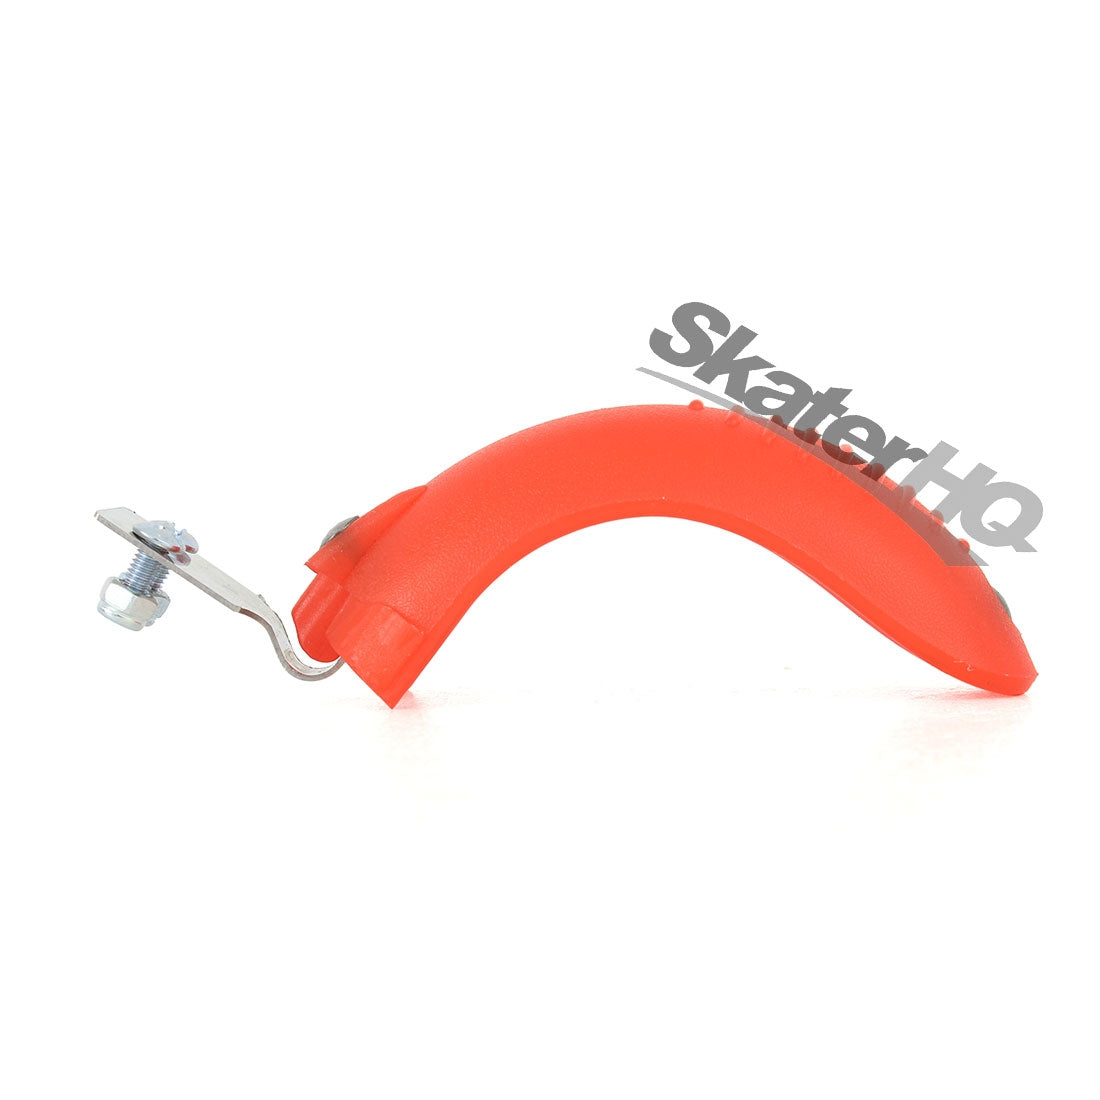 Micro Mini Deluxe Brake 4611 - Dark Orange (for Navy/Red) Scooter Hardware and Parts